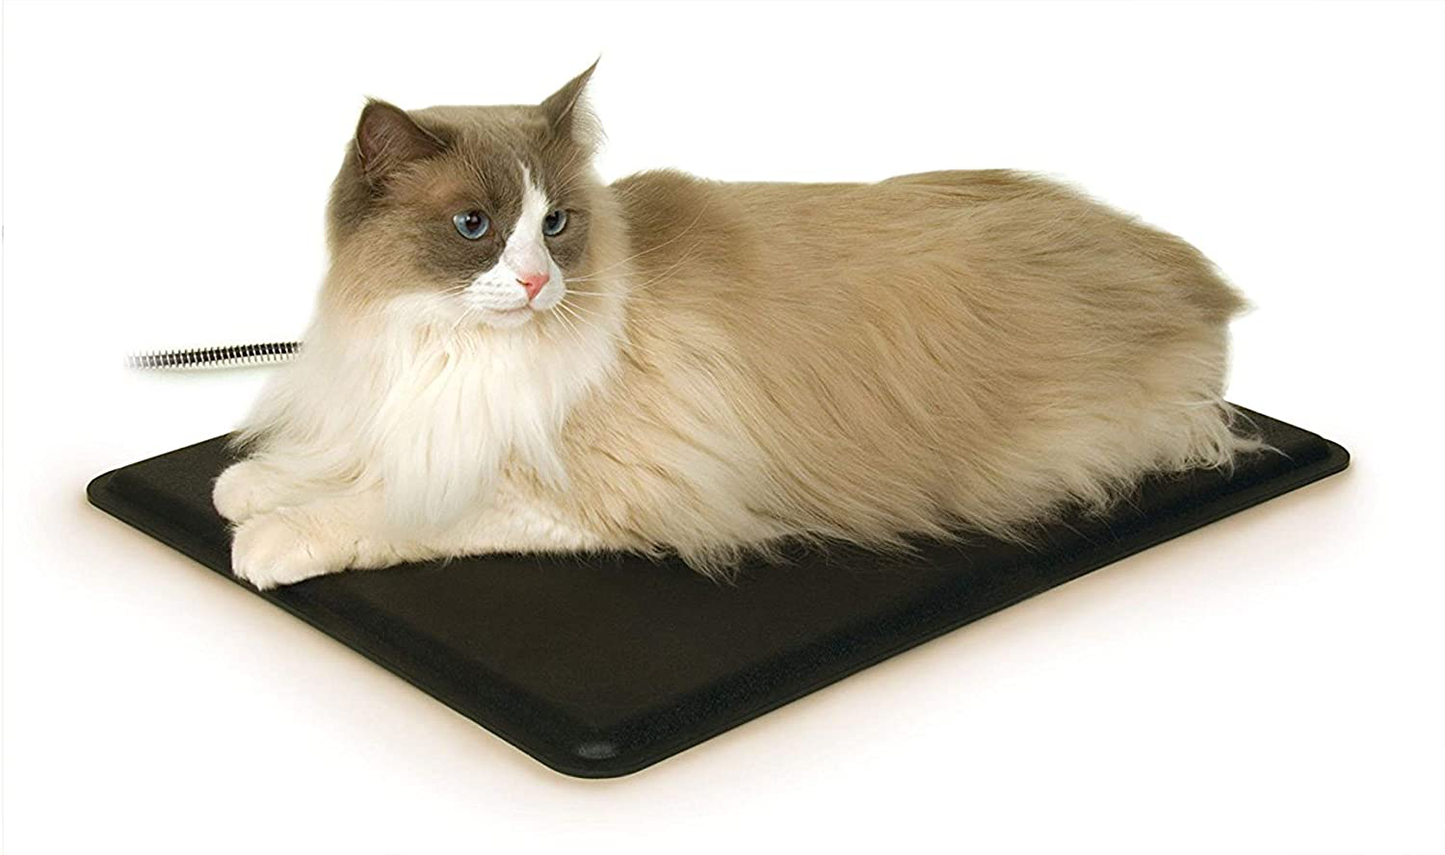 K&H Pet Products Heated Extreme Weather Outdoor Heated Kitty Pad